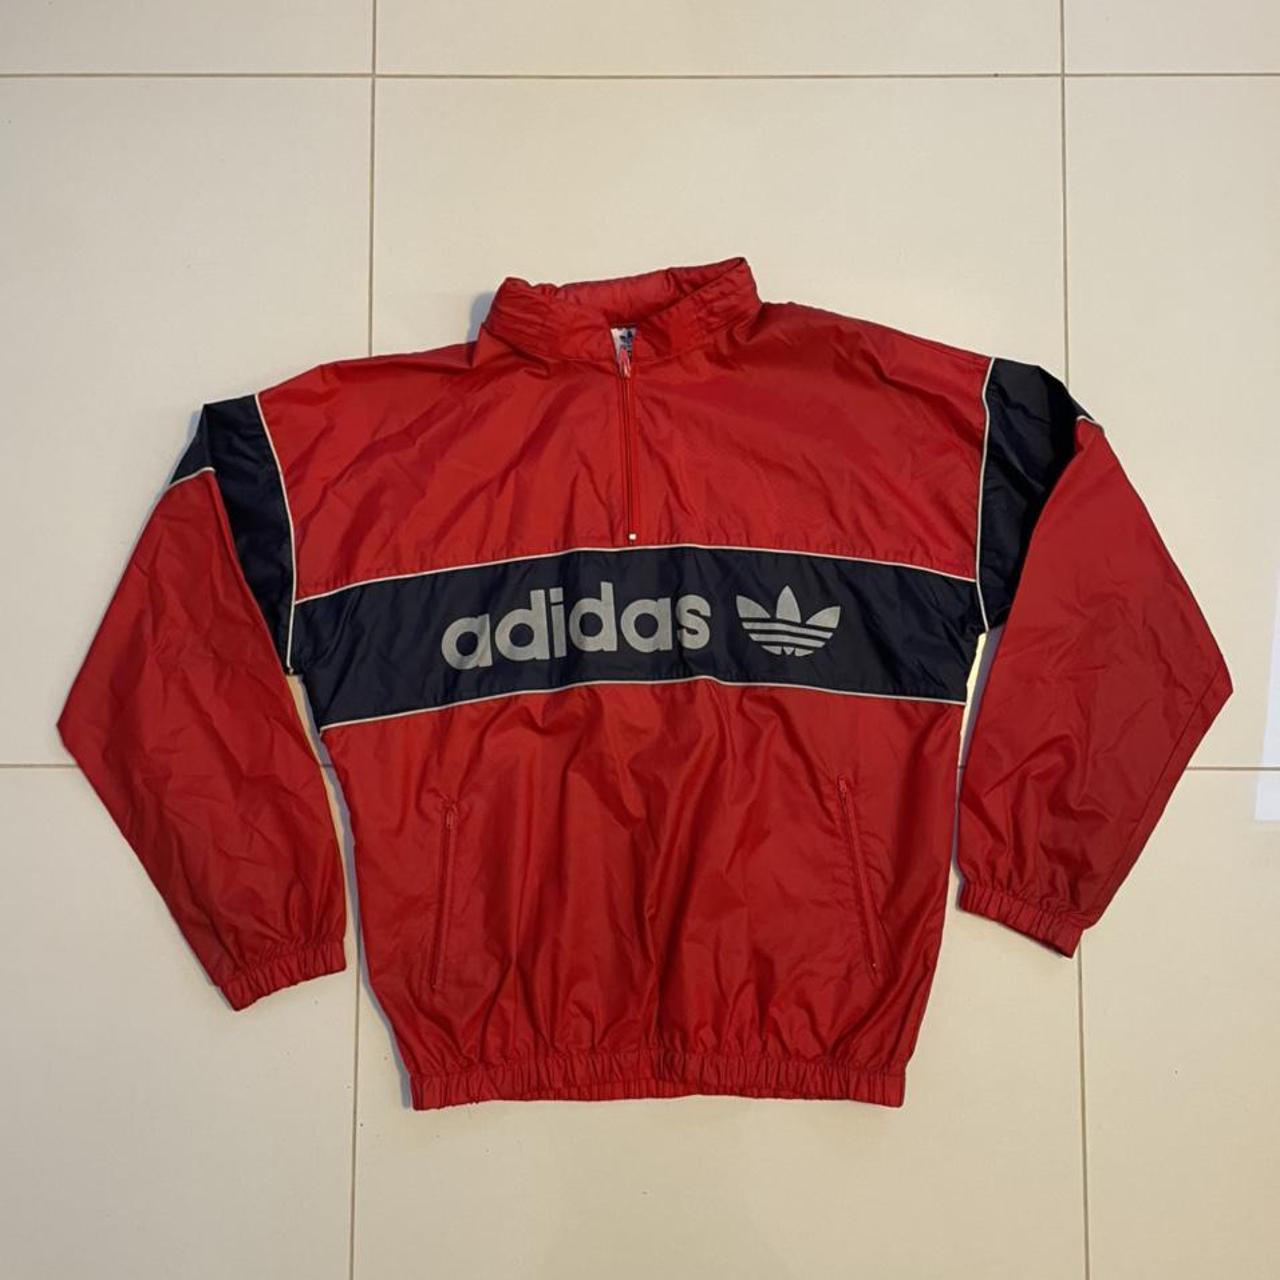 Adidas Men's Red and Navy Jacket | Depop